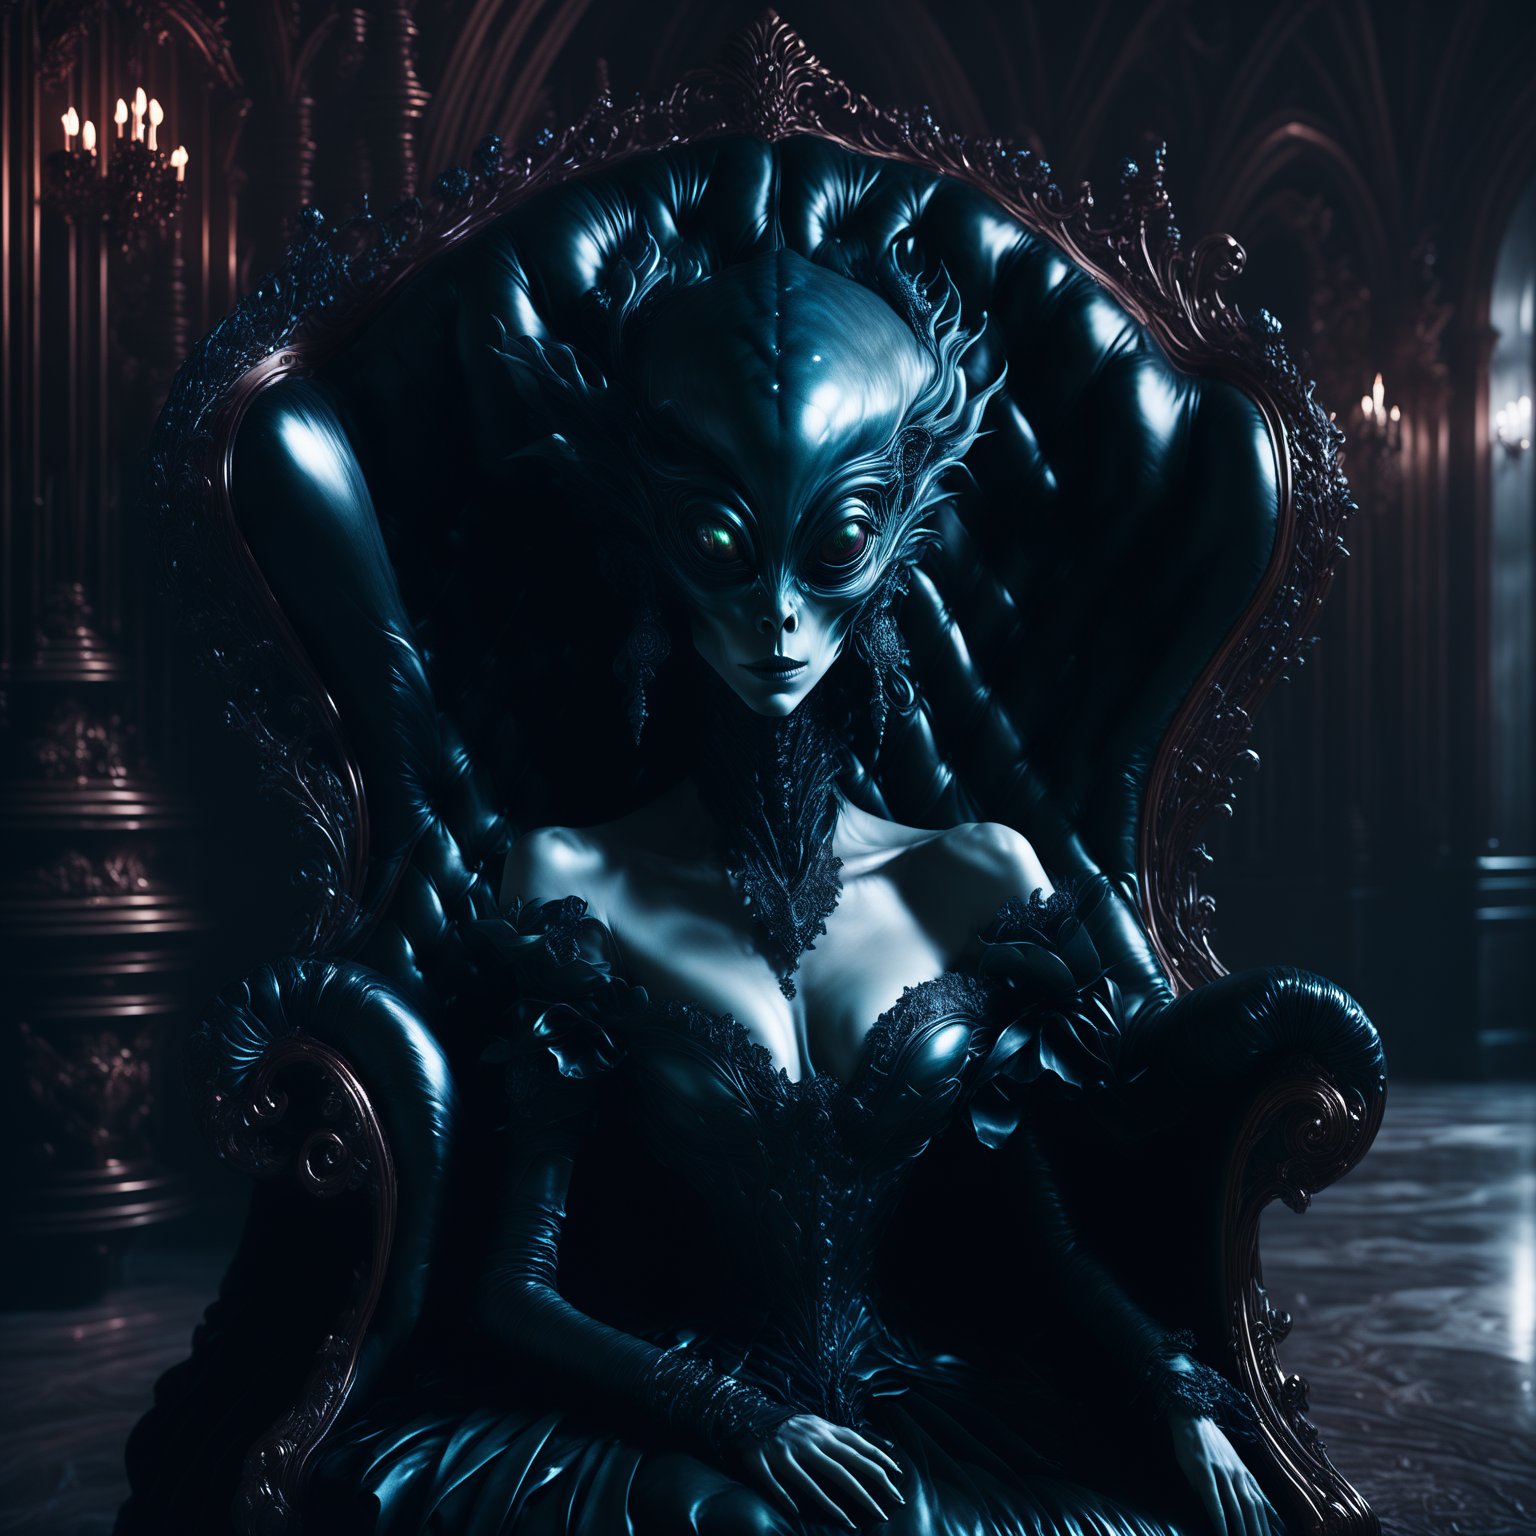 a alien in a black dress sitting on a armchair in a dark room with a chandelier, dark style, darkness, fantasy, gothic, horror, 